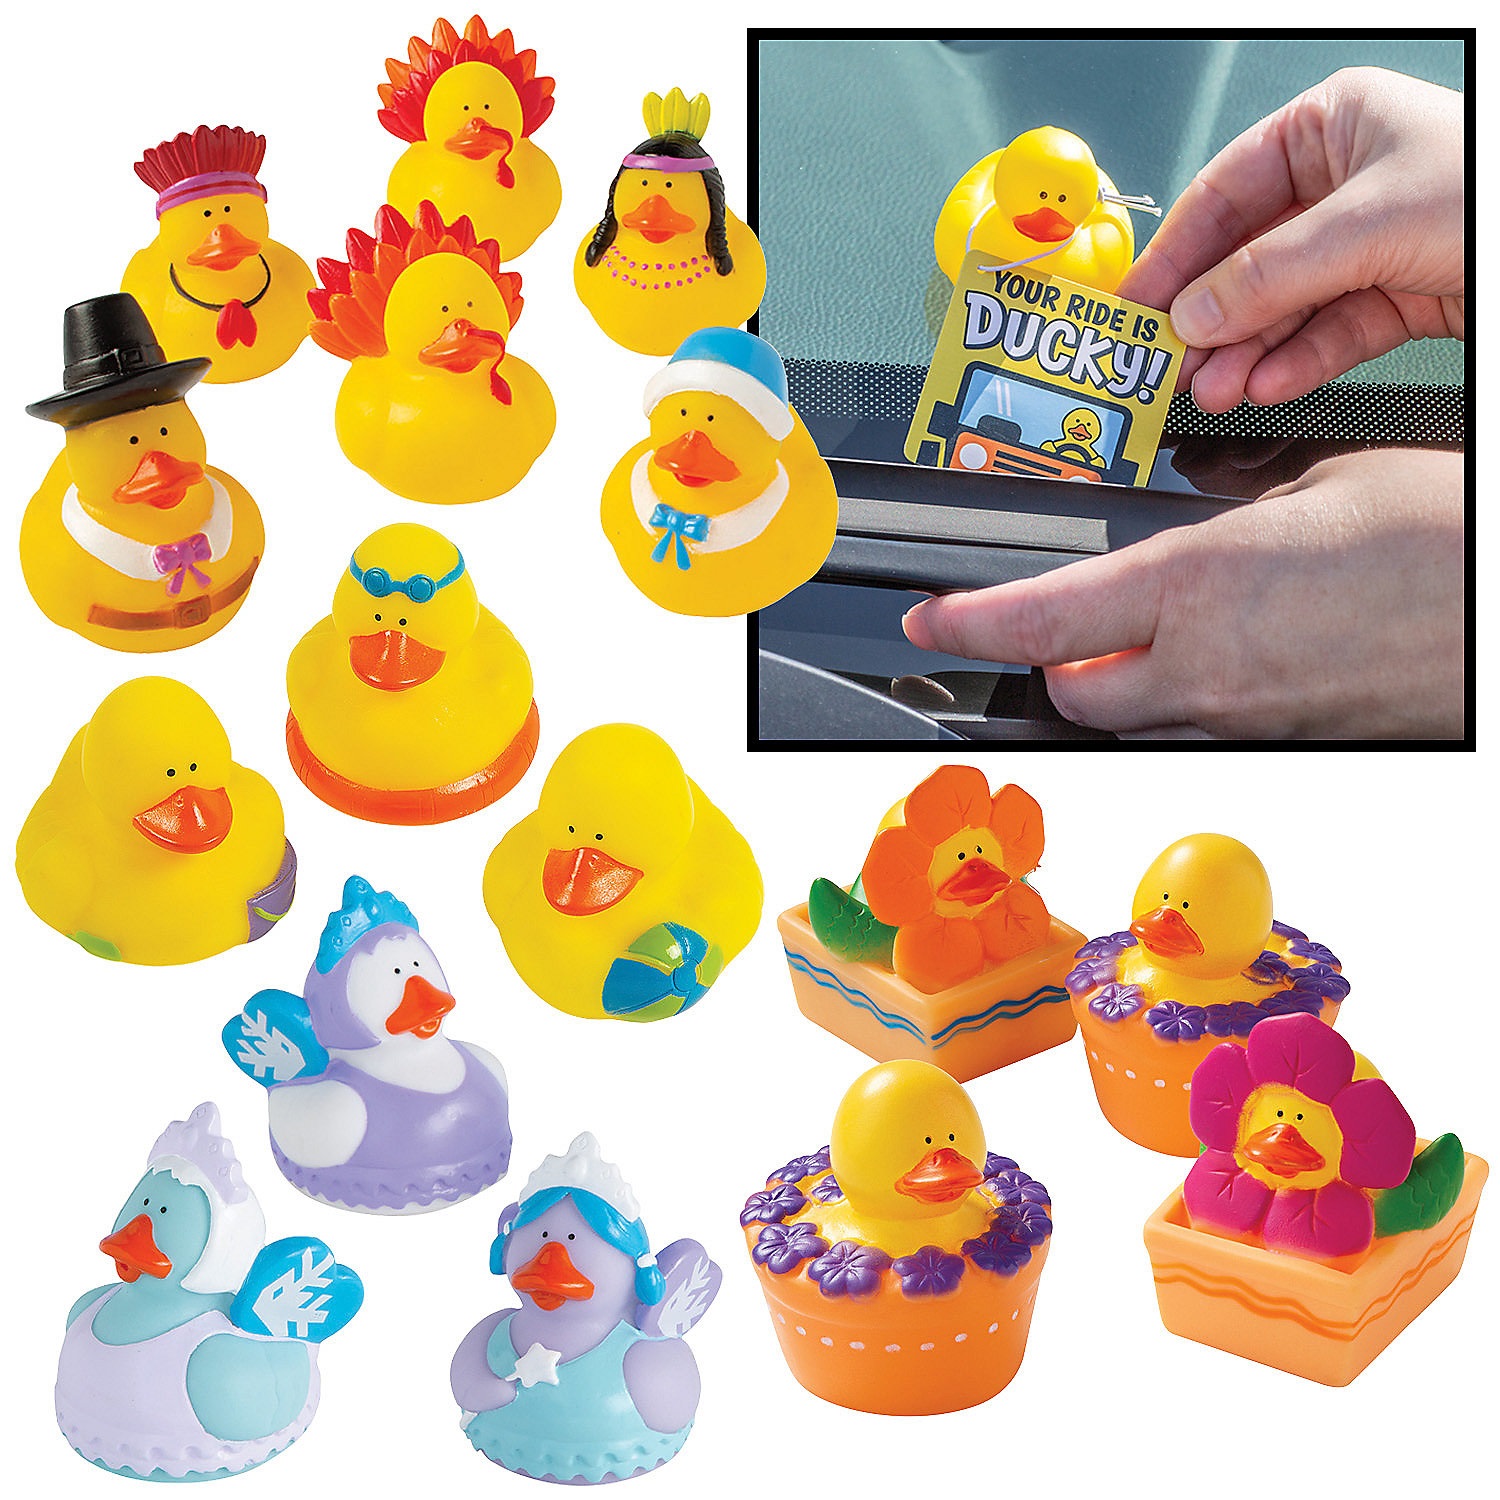 duck-duck-the-four-seasons-kit-for-48_14205750